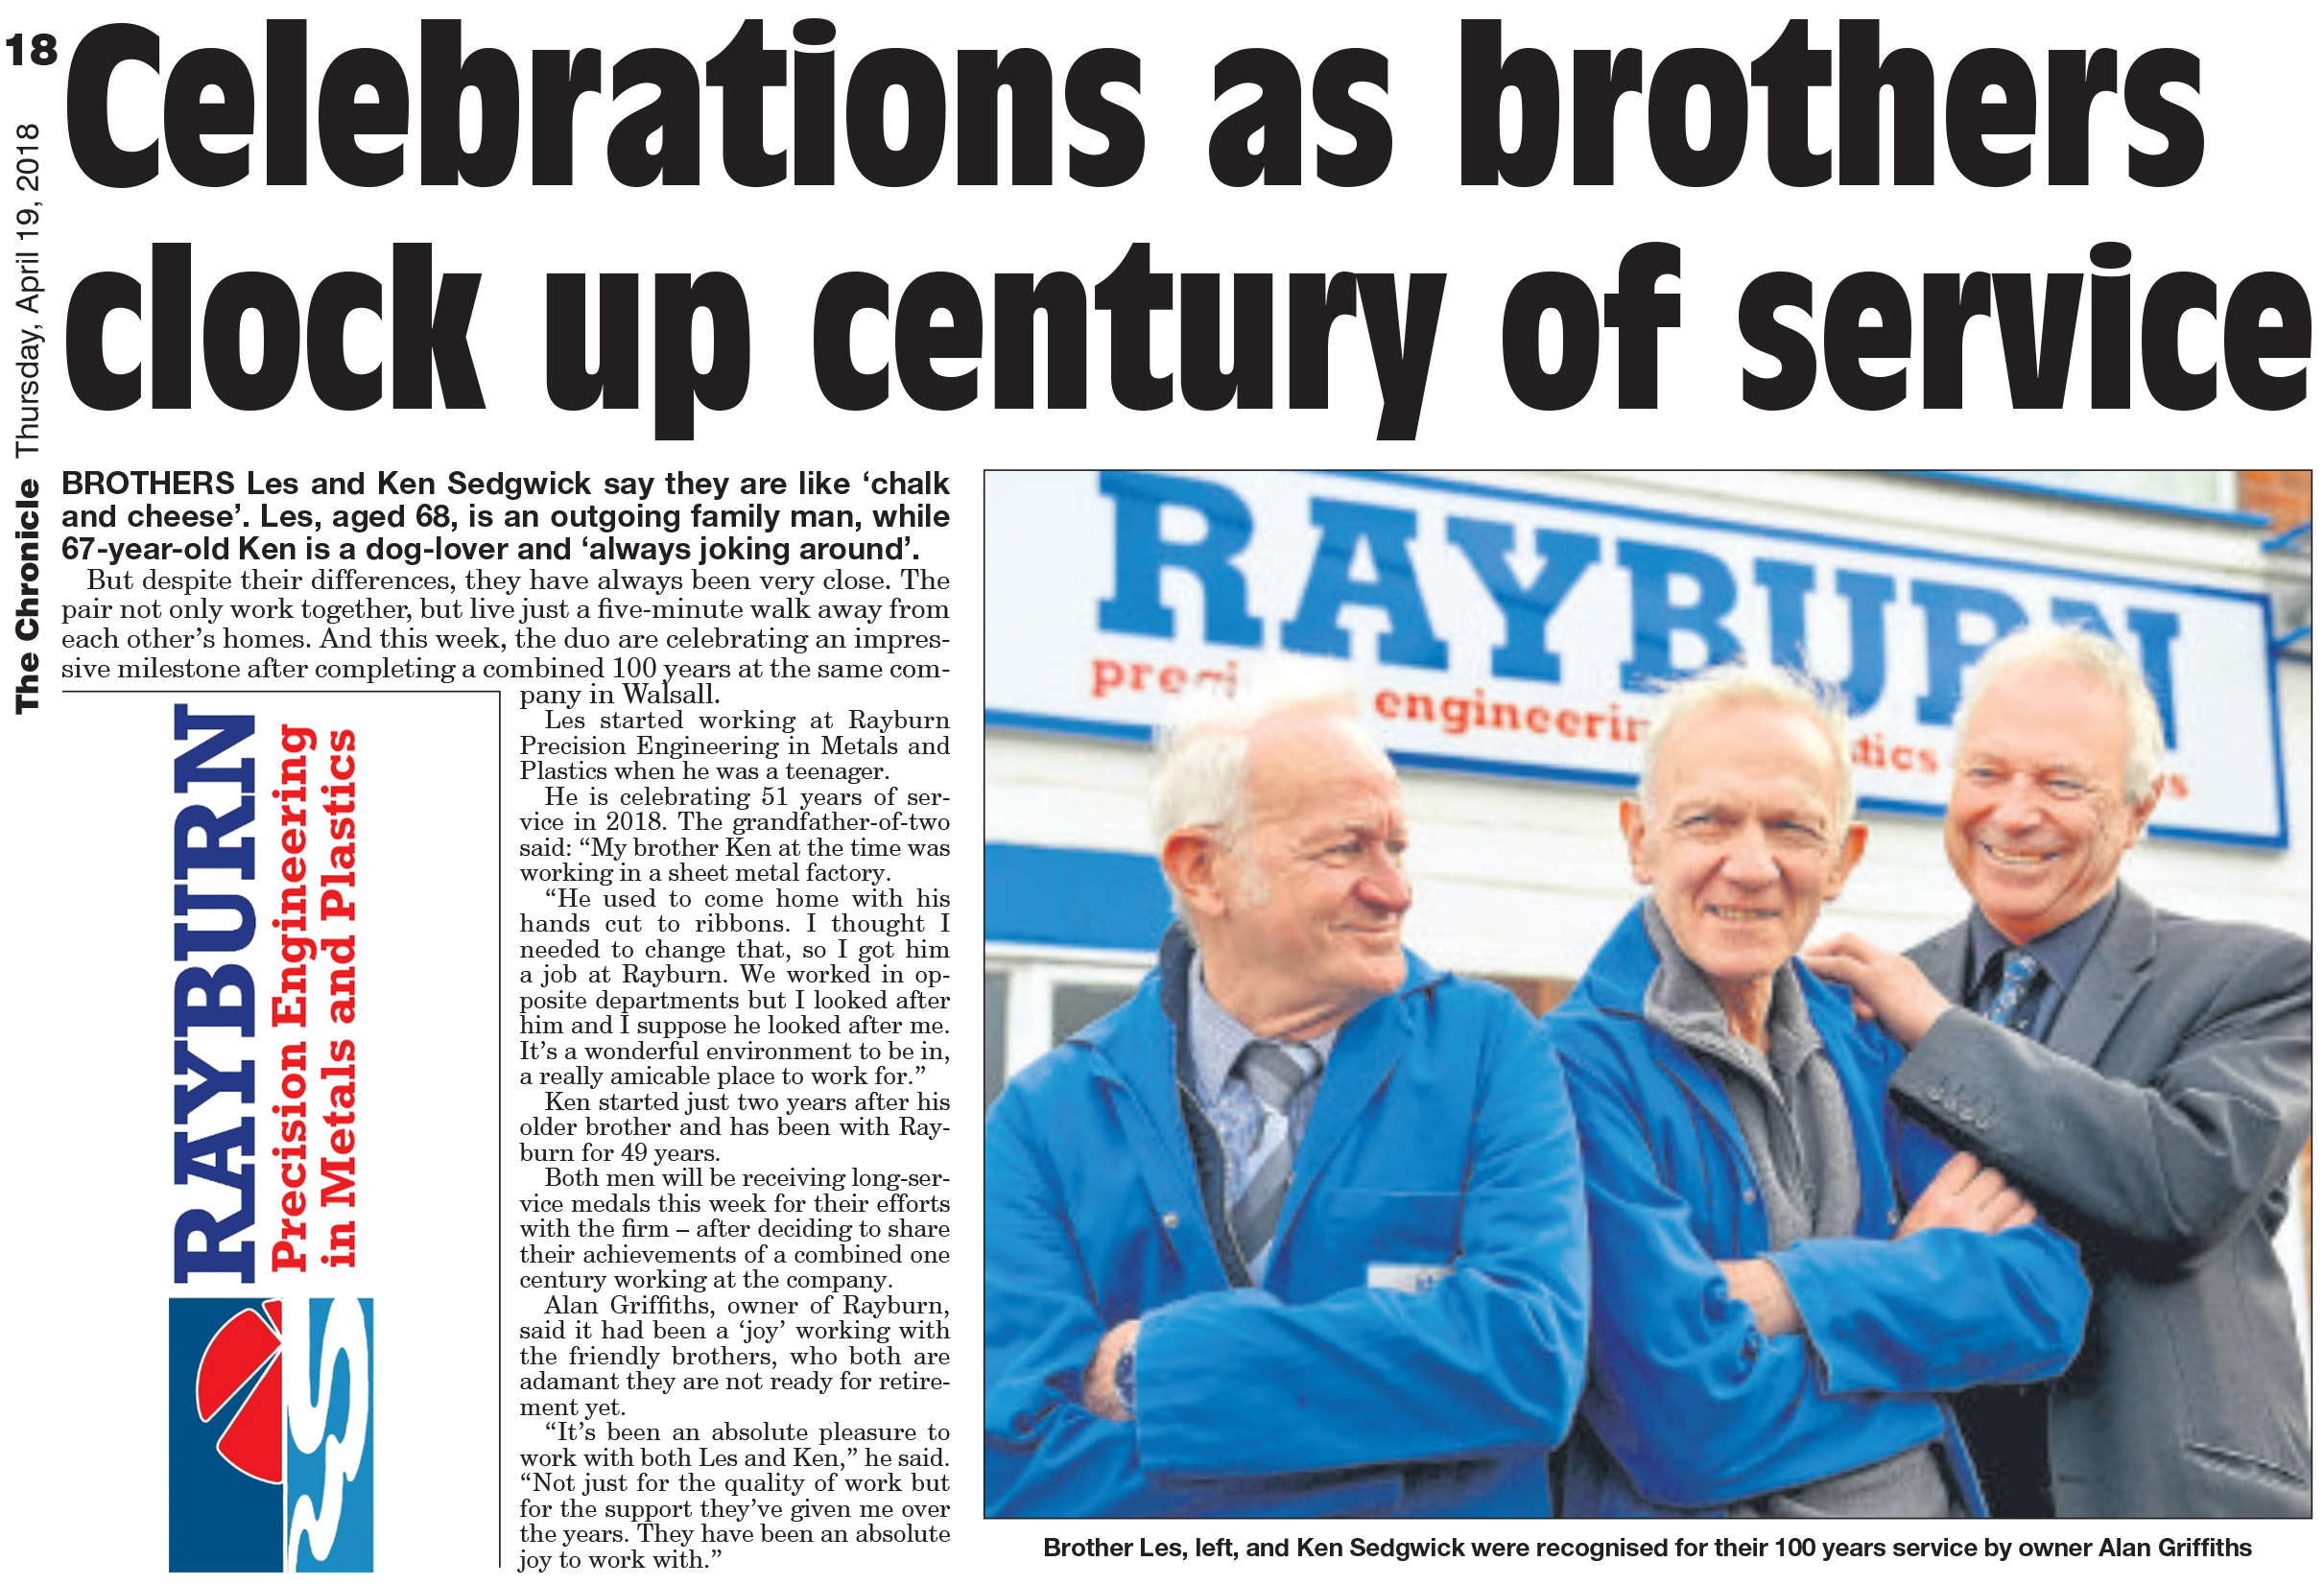 KEN AND LES SEDGWICK BROTHERS CELEBRATE 100 YEARS OF SERVICE